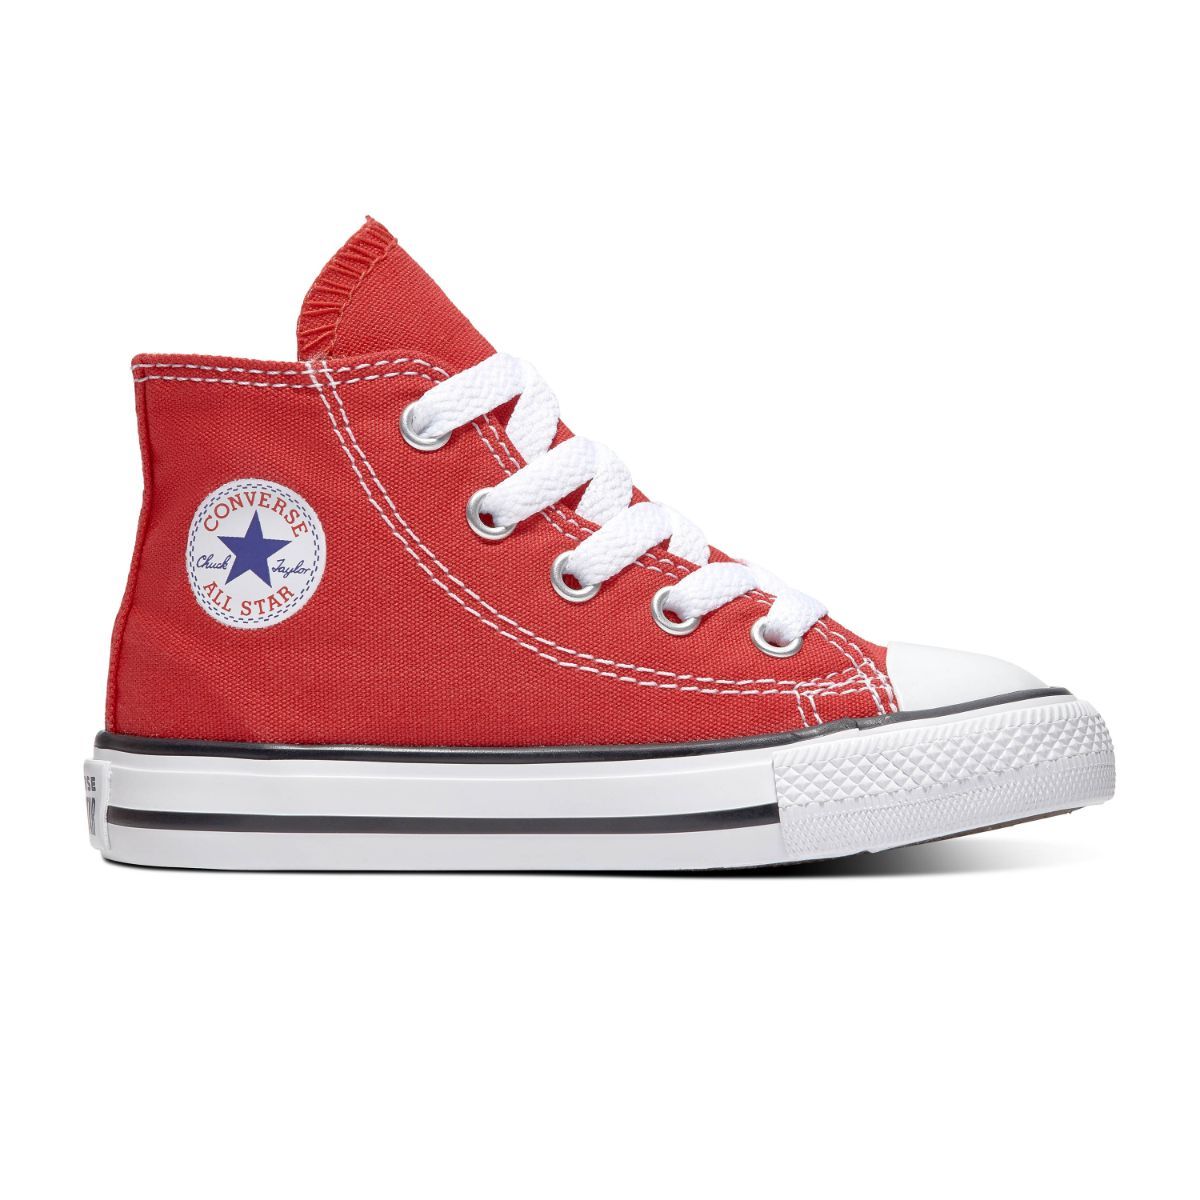 Toddler Chuck Taylor All Star Red High Top